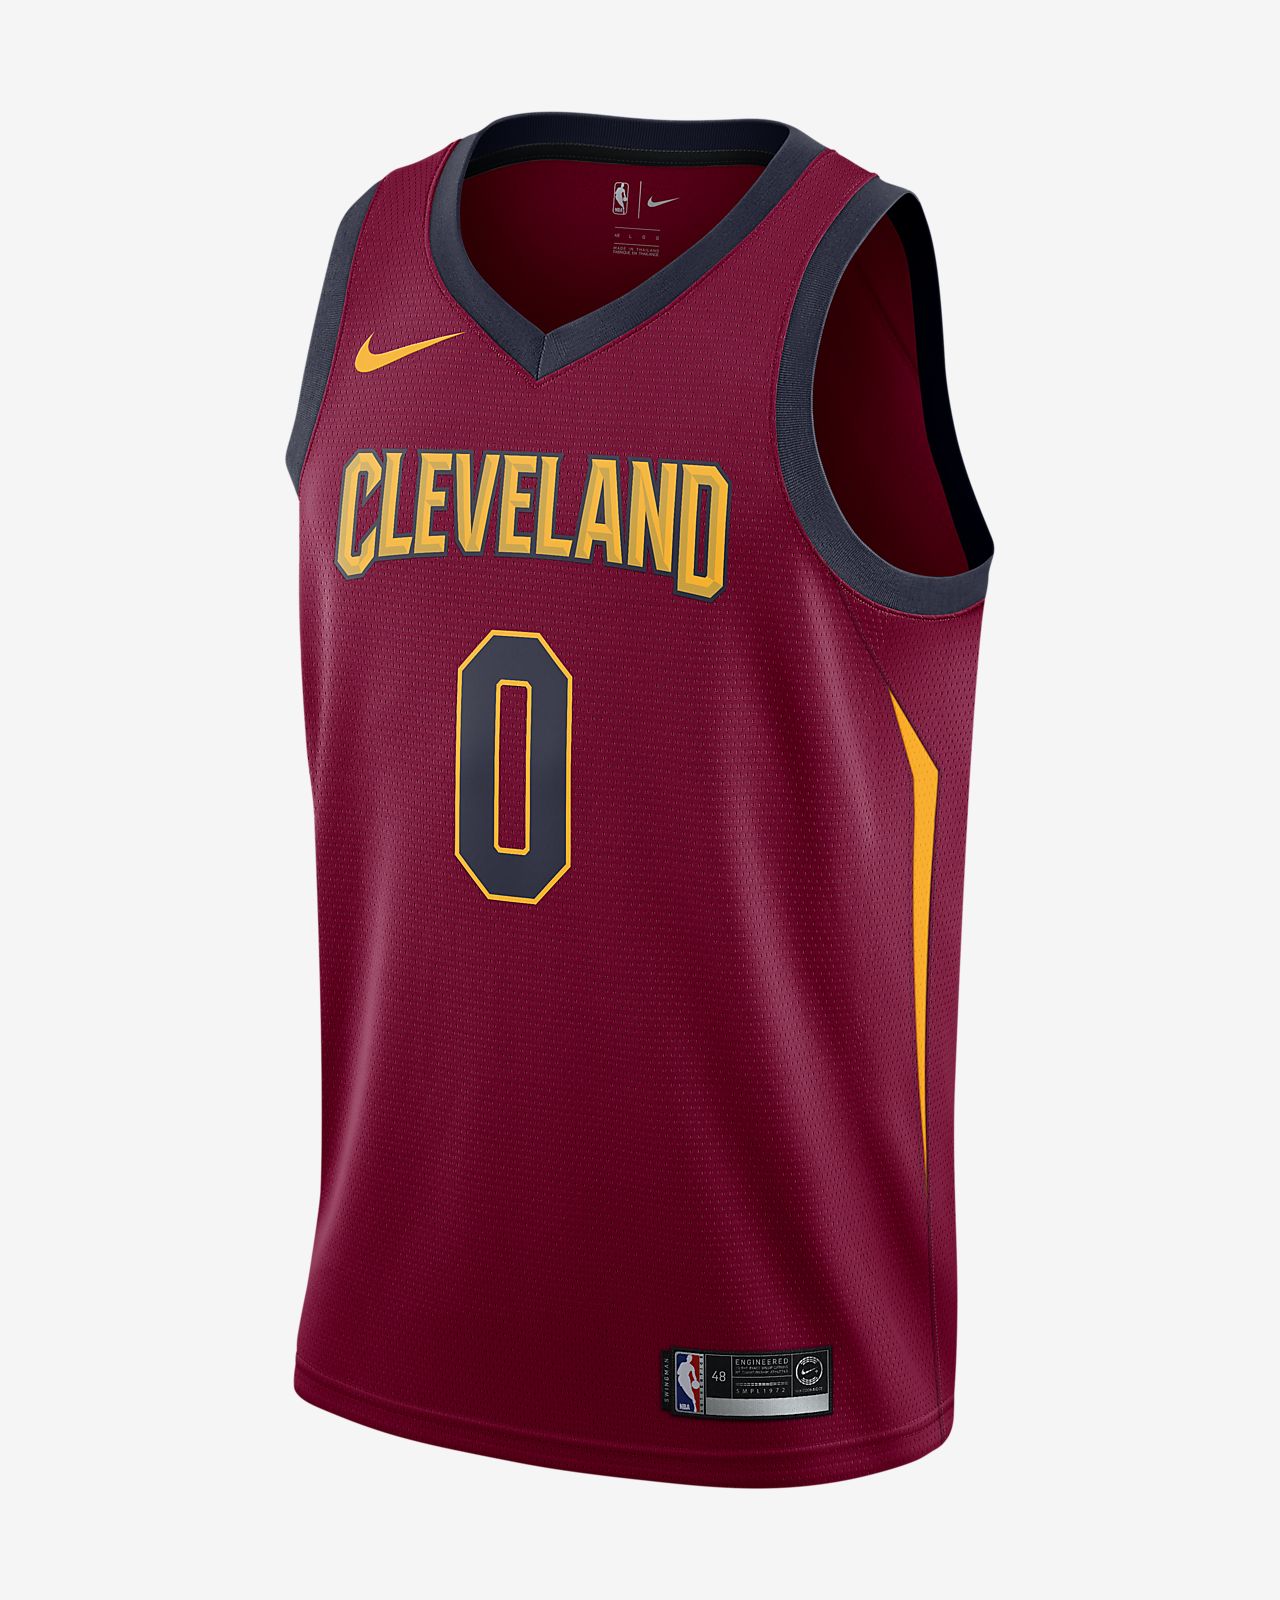 Cleveland Cavaliers City Jersey 20182019 Cleveland City Edition